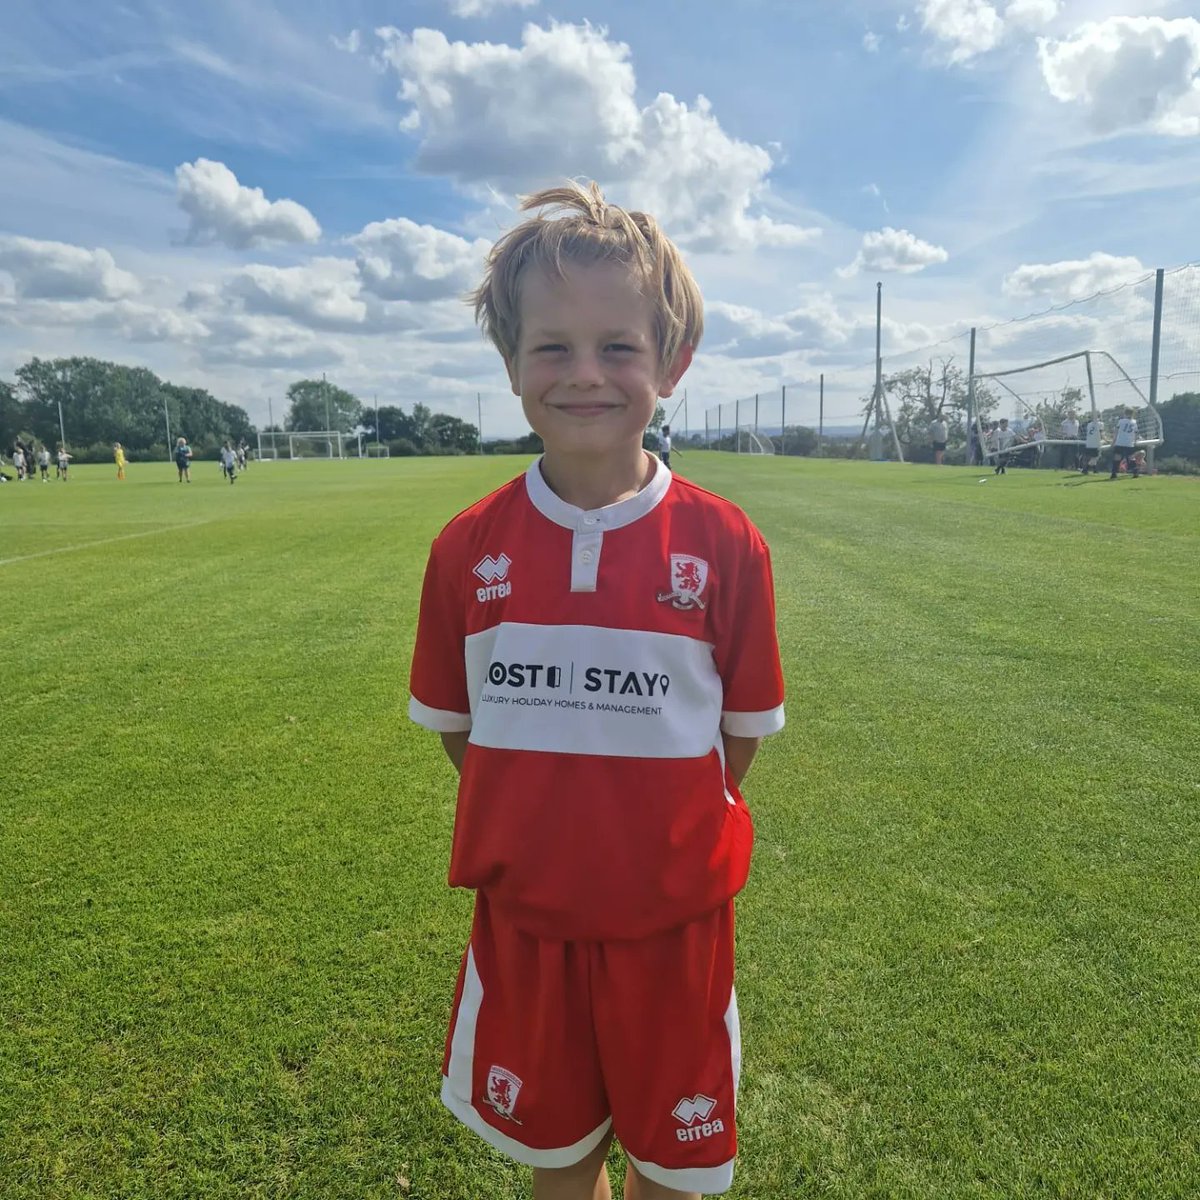 The boy making his U9 Boro debut yesterday against Derby, scored the opener aswell. #UTB #boro #academyfootball